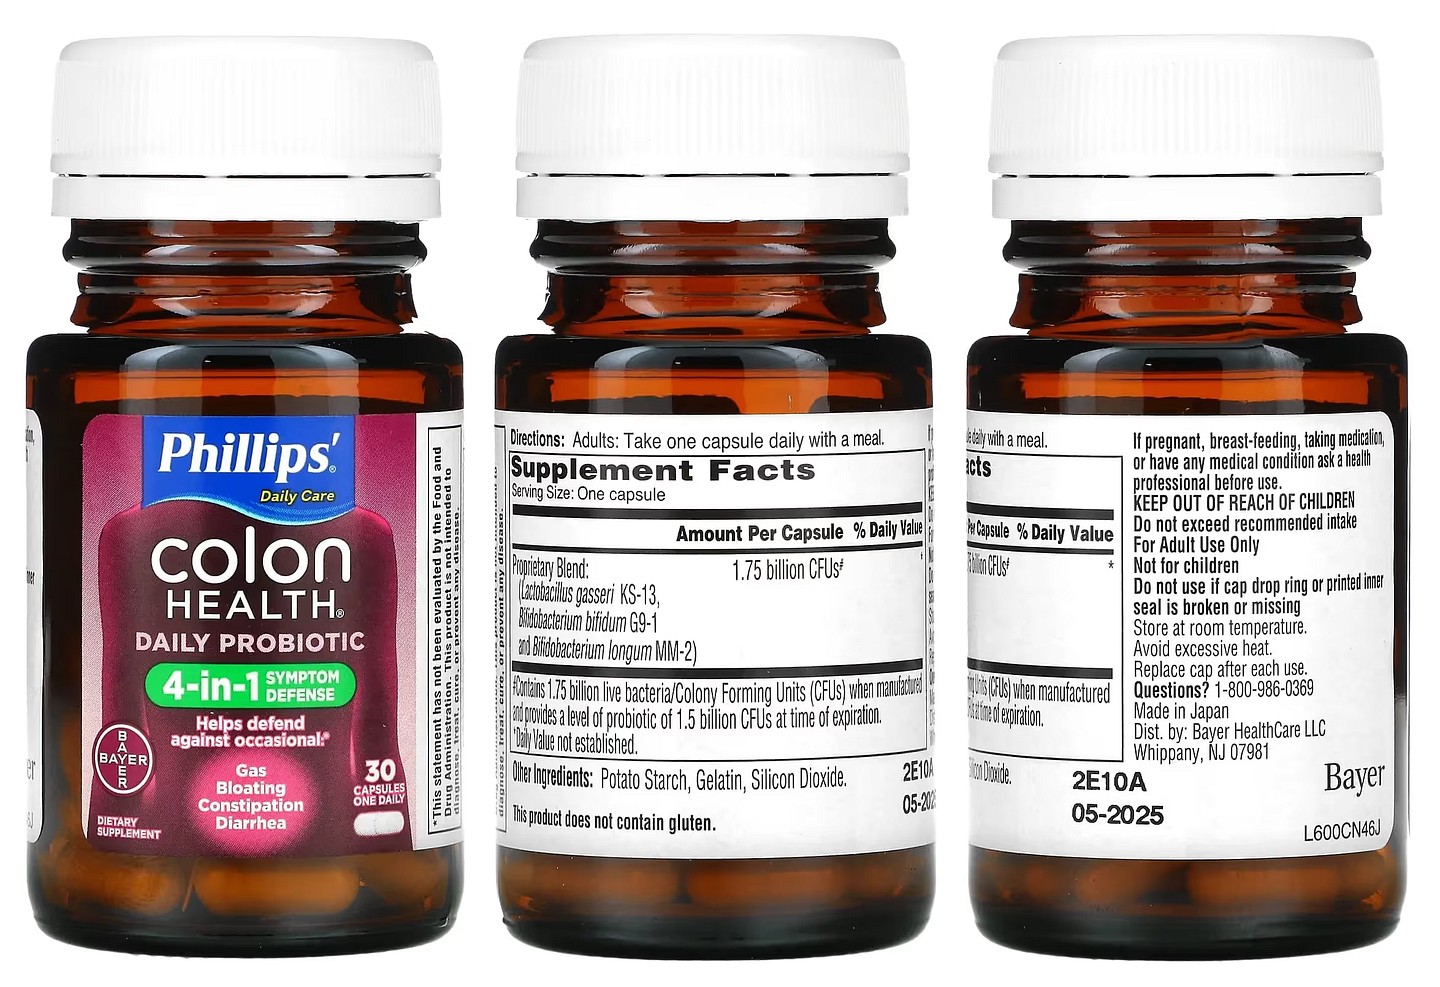 Phillips, Colon Health Daily Probiotic Supplement packaging